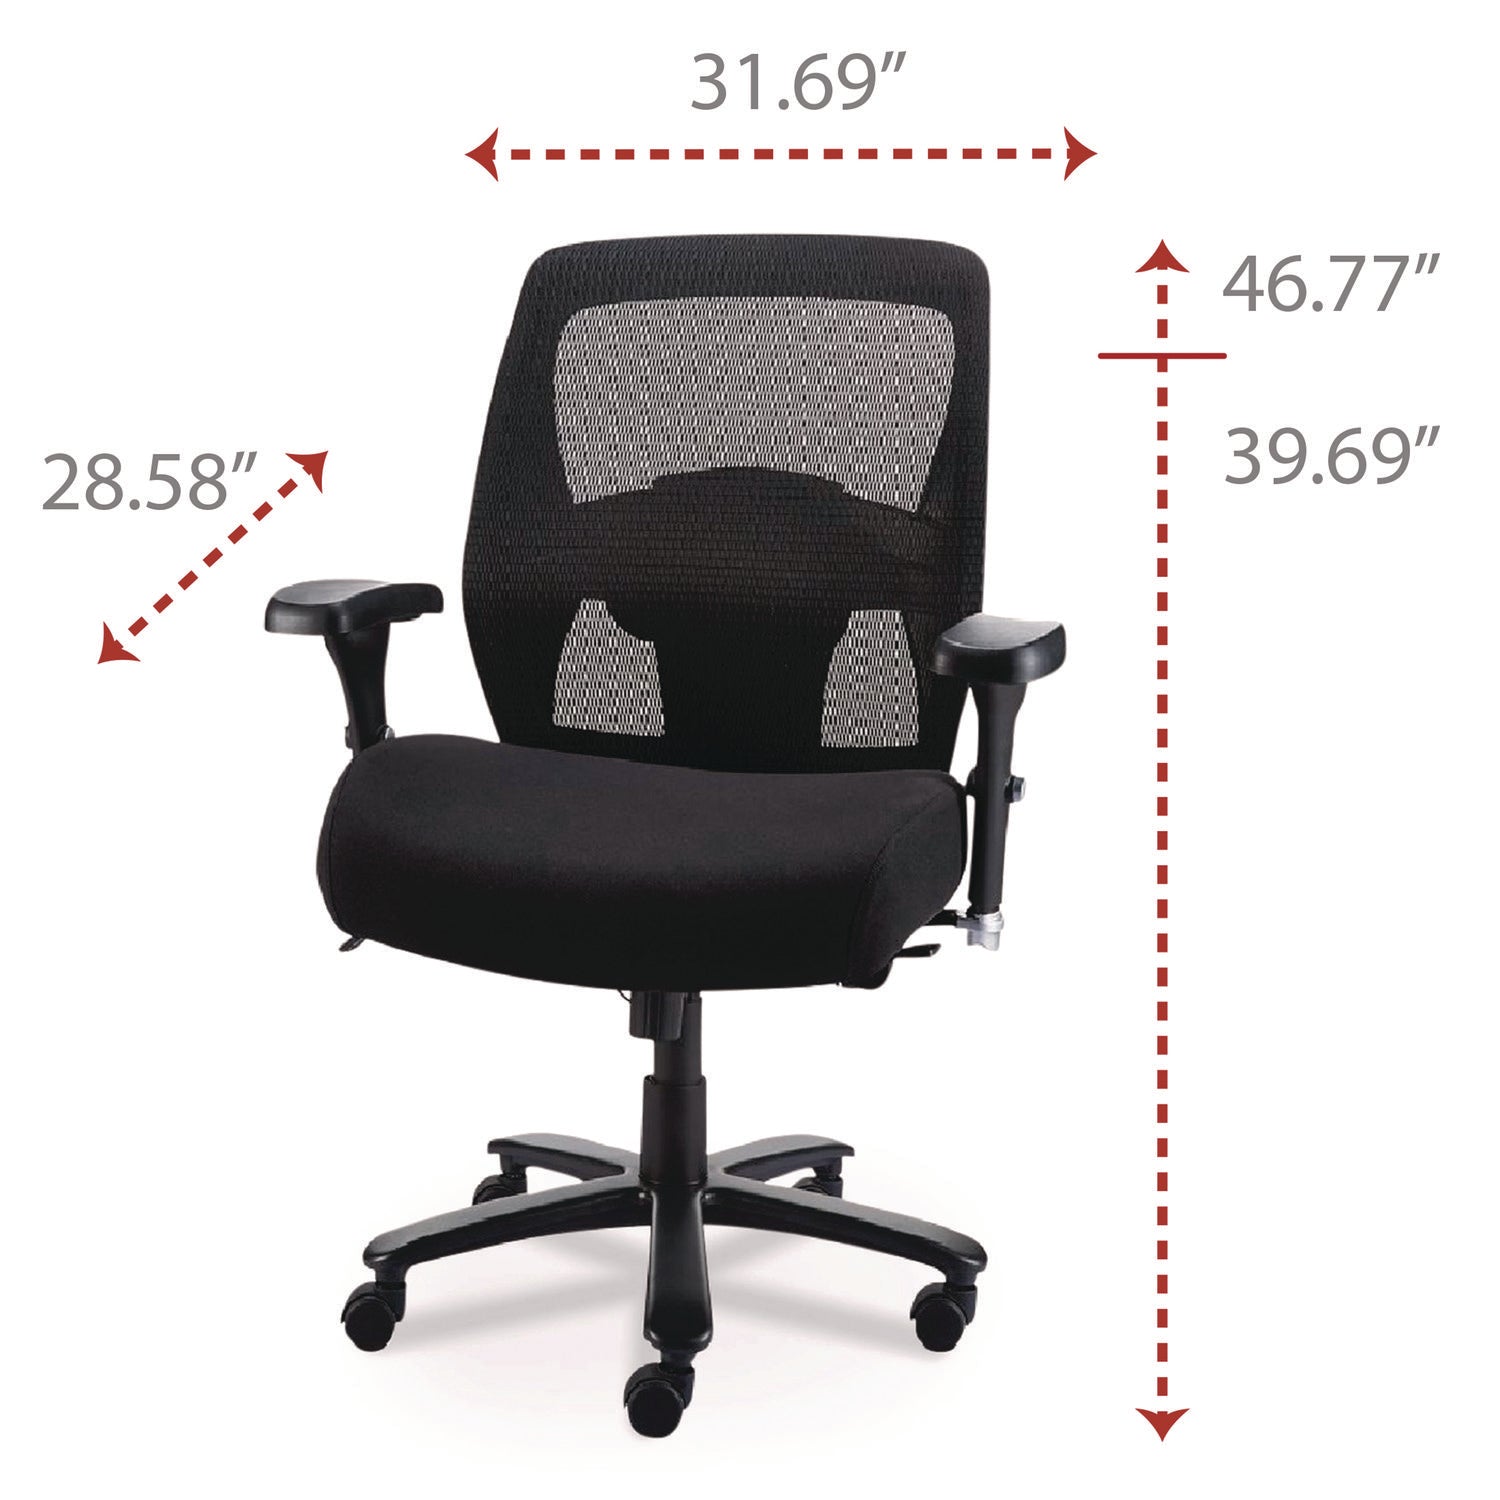 Alera Faseny Series Big and Tall Manager Chair, Supports Up to 400 lbs, 17.48" to 21.73" Seat Height, Black Seat/Back/Base - 7